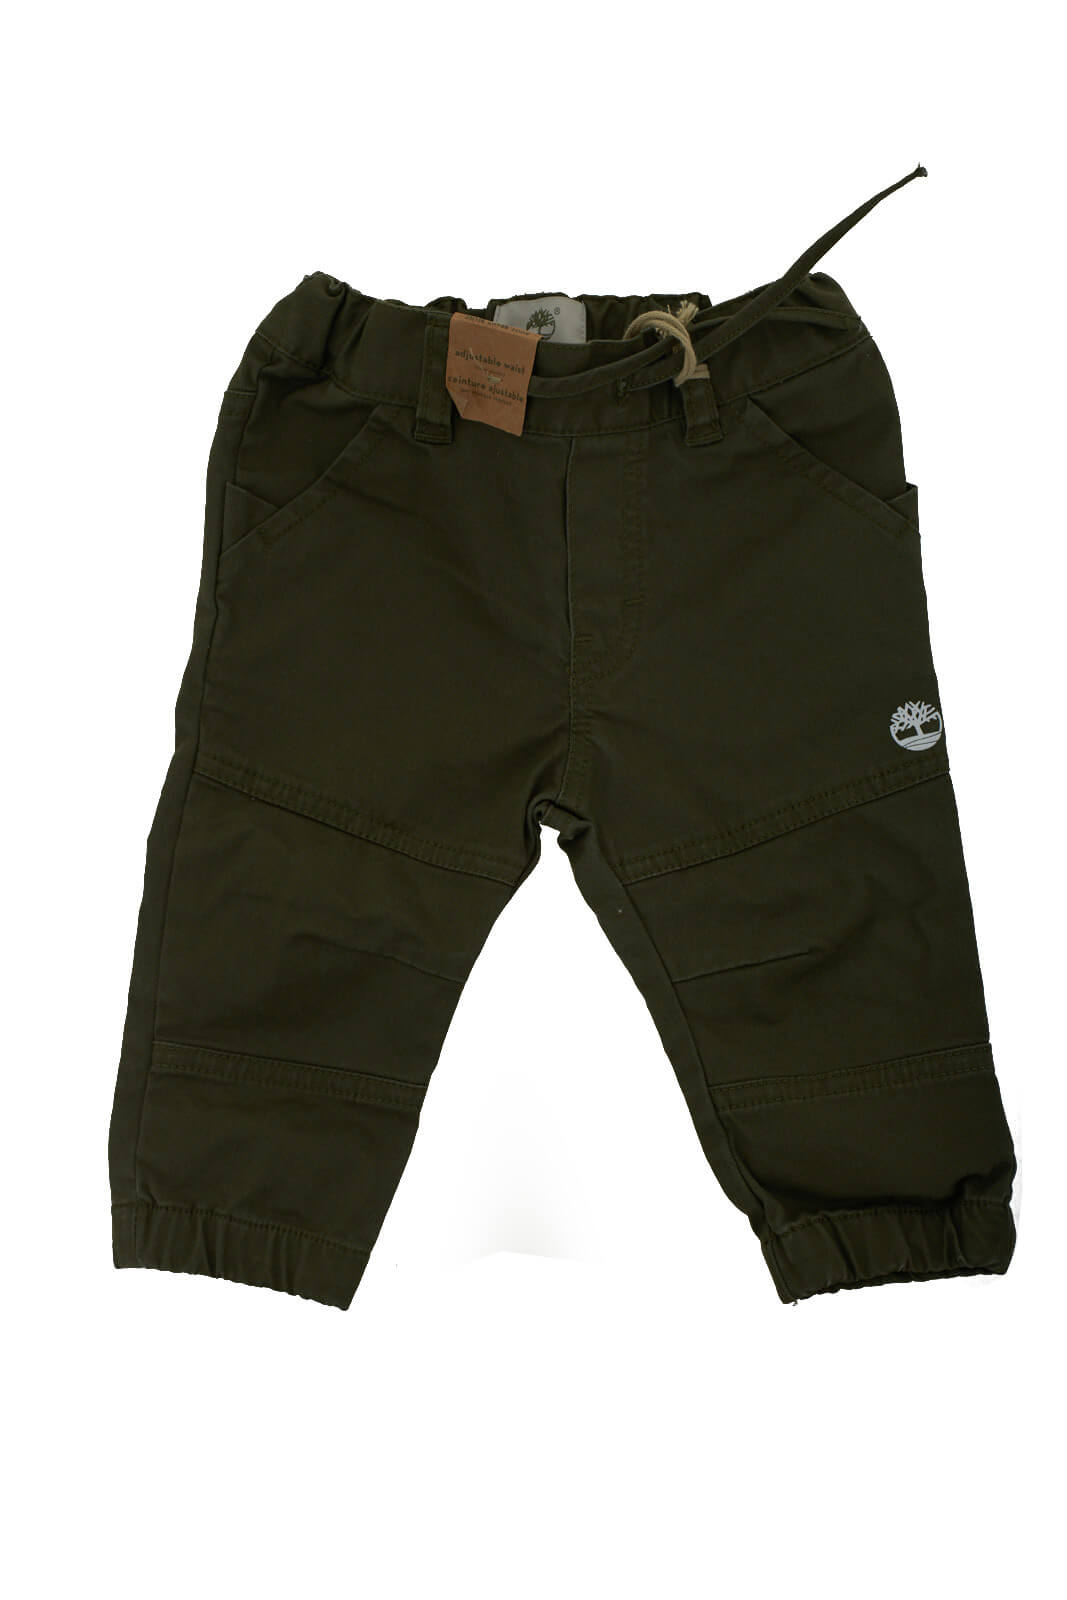 Timberland children's trousers